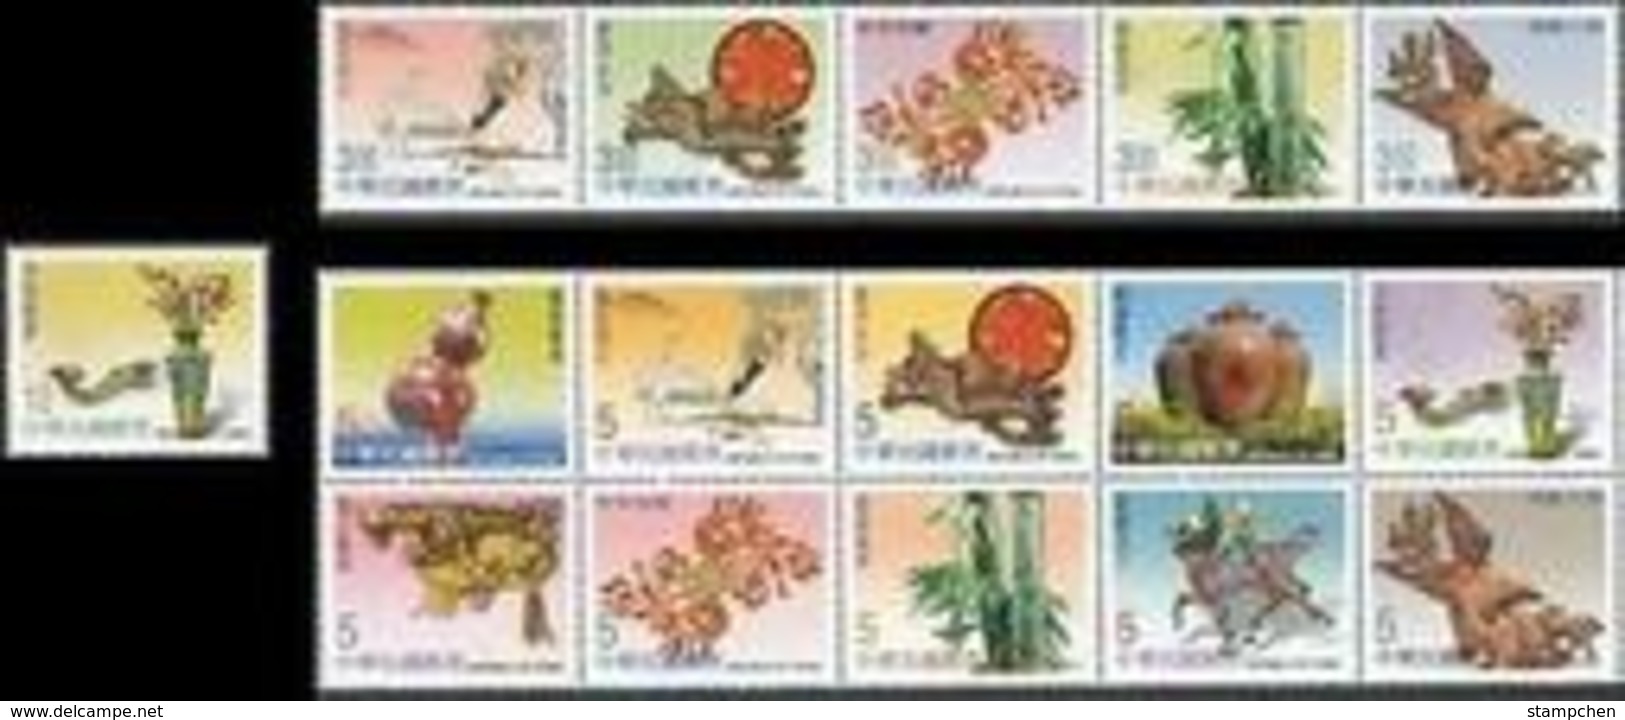 2003 Greeting Stamps Crane Bamboo Fish Scepter Coin Peony Flower Love Liquors Duck Eagle Turtle - Trees